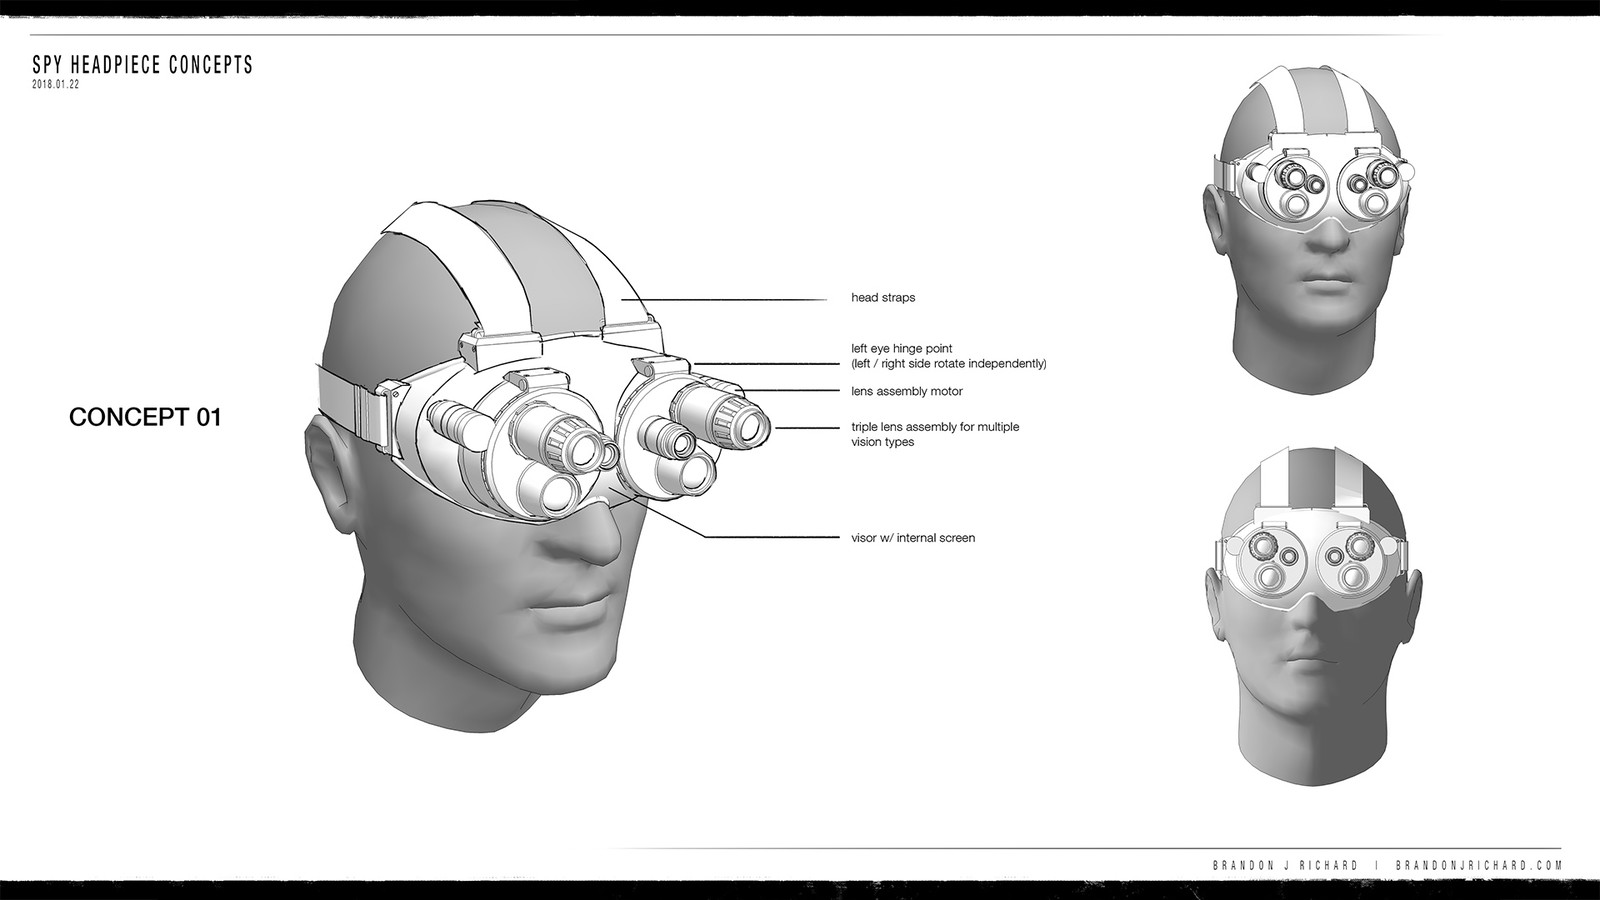 Concept board of the approved headpiece, with alternate views.